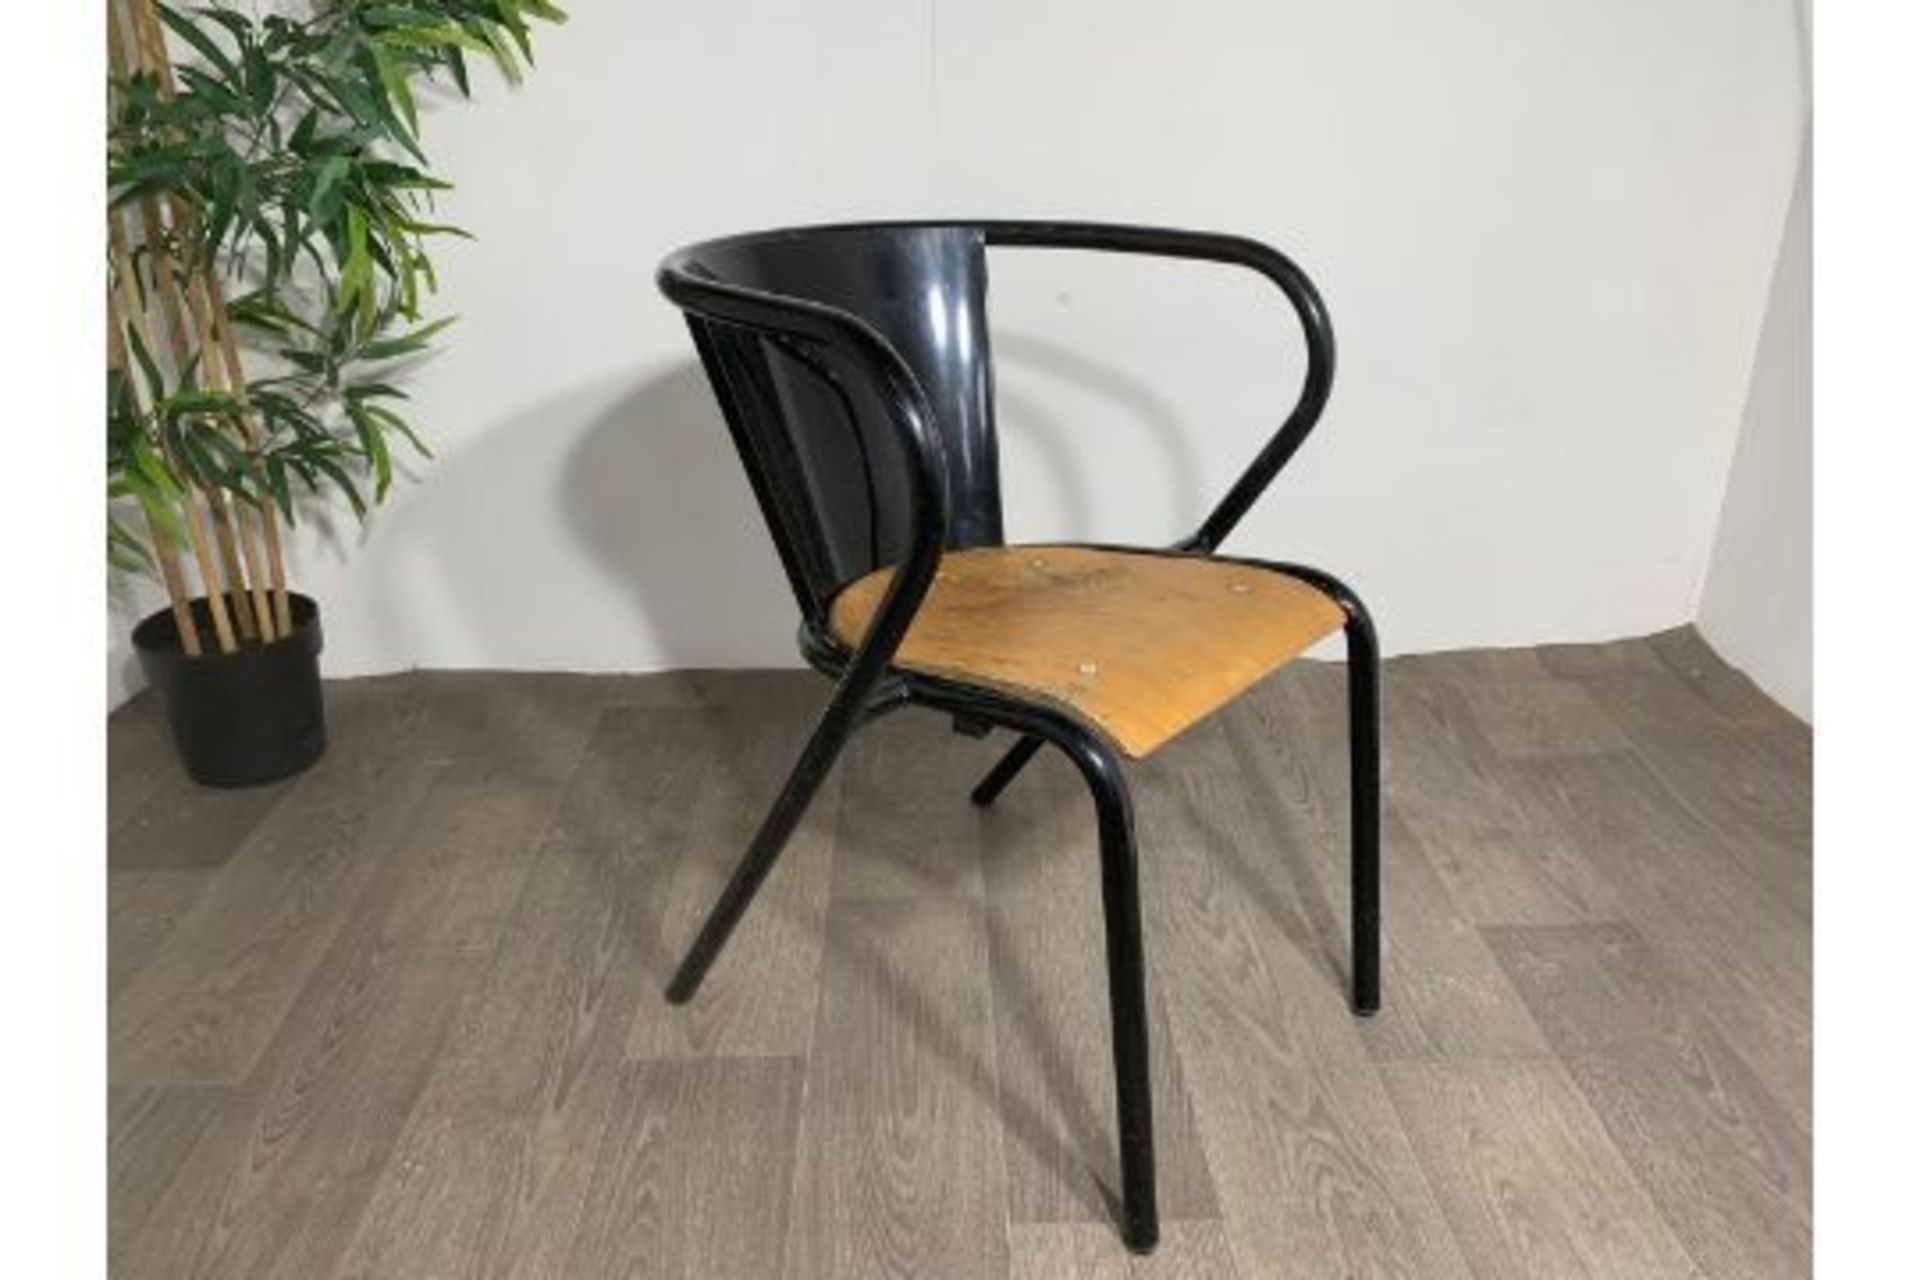 Adico 5008 Black Chair With Wooden Seat x2 - Image 2 of 6